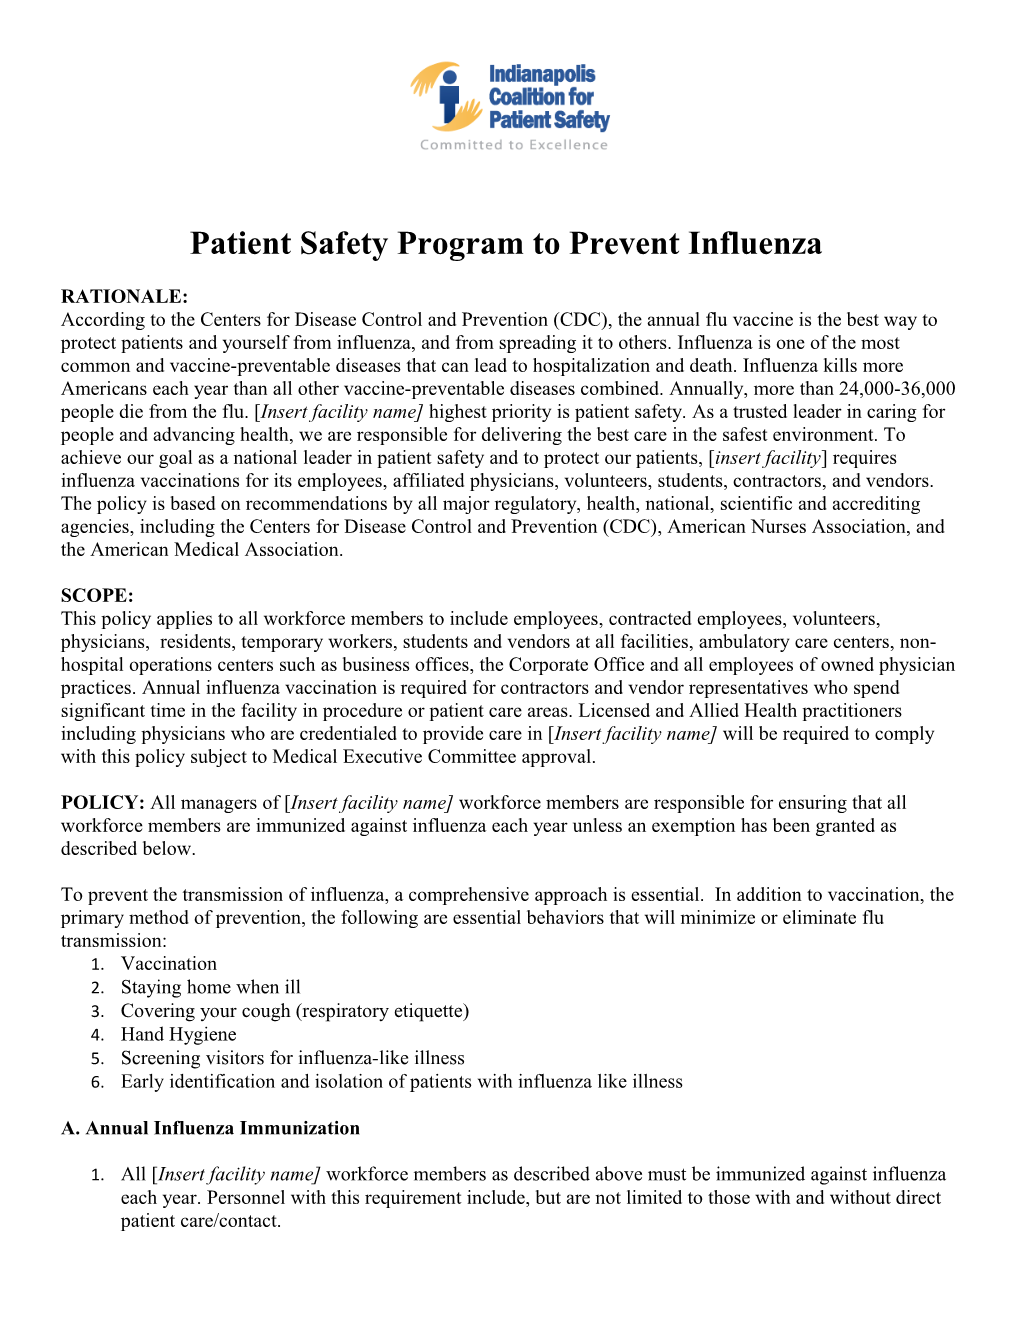 Indianapolis Patient Safety Coalition Flu Policy